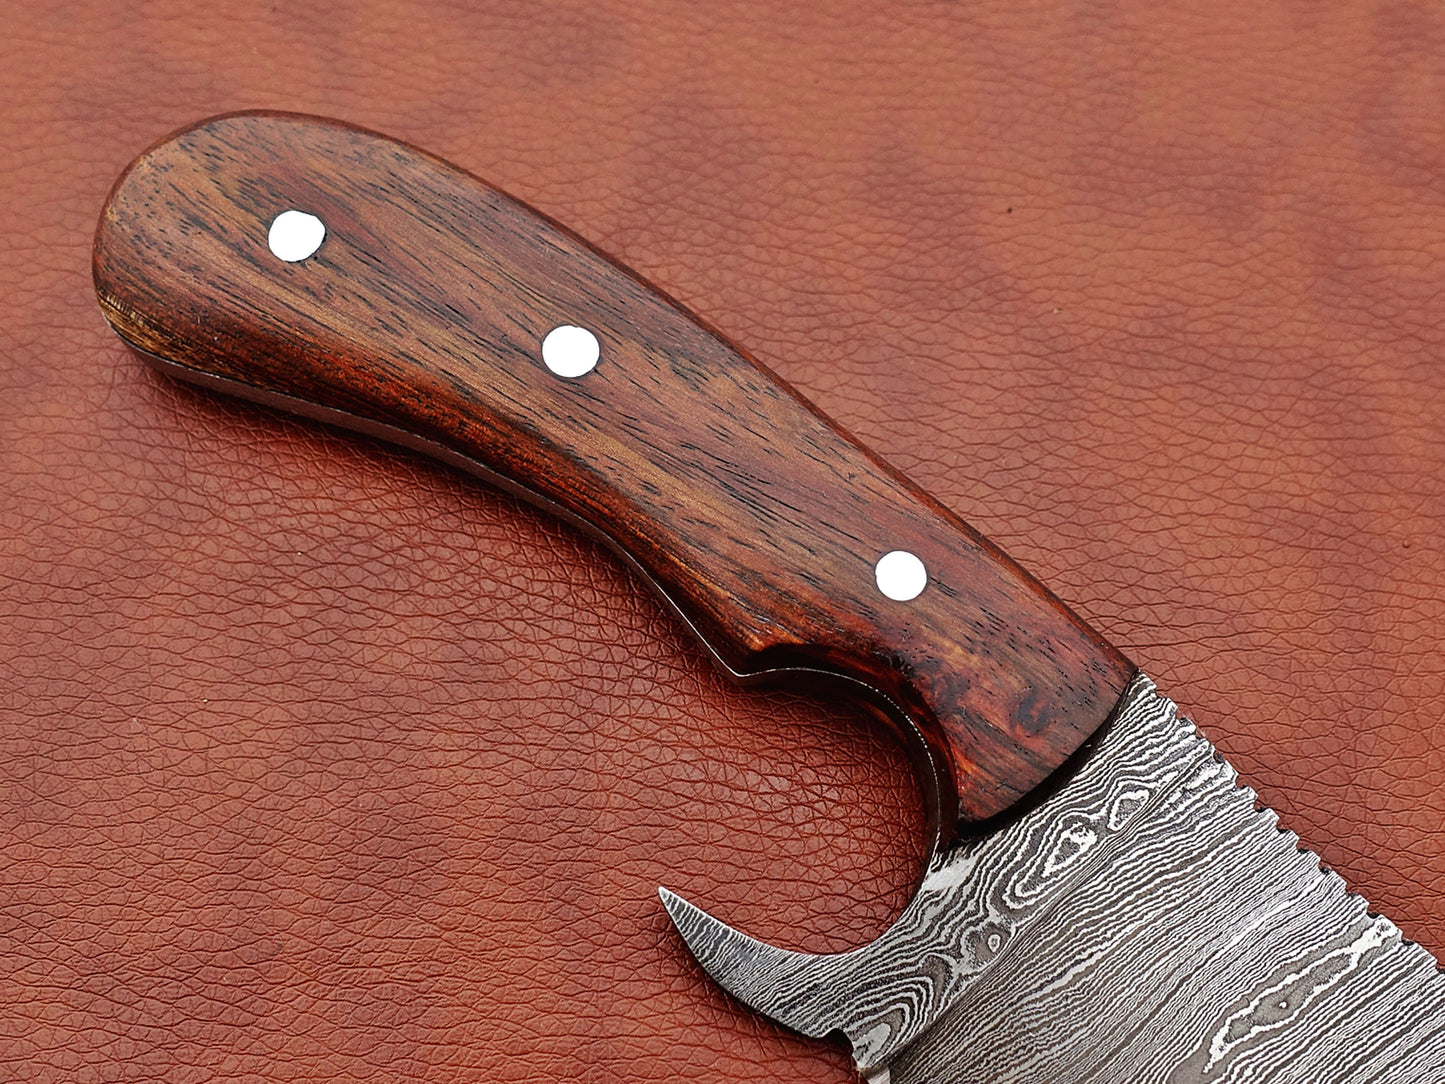 10" hand forged Twist Pattern Damascus steel meat Cleaver, Natural Walnut wood scale chopper knife, Leather sheath included